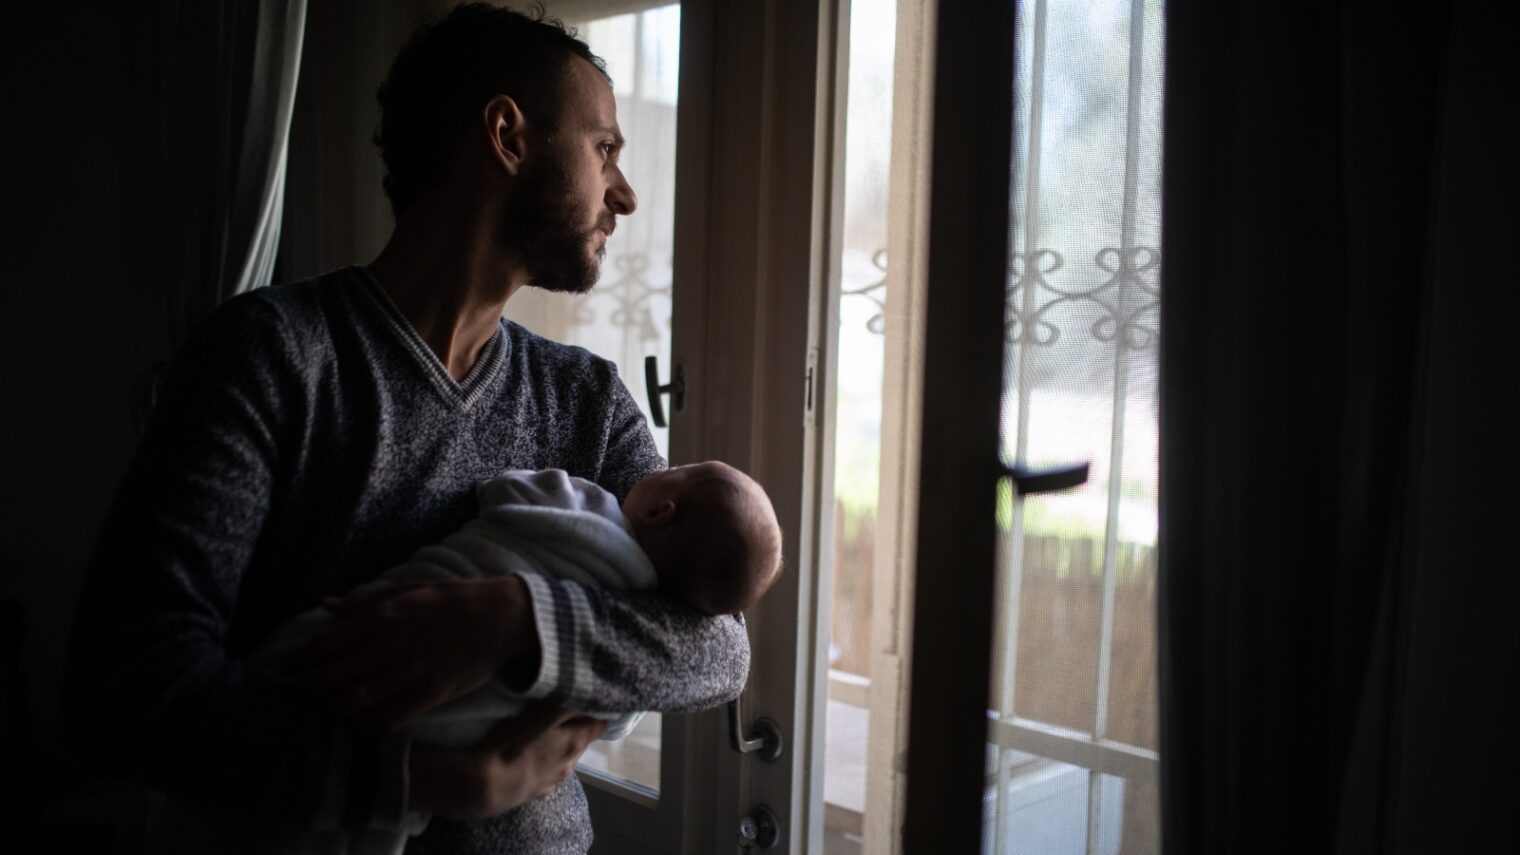 A Jerusalem father holds his baby as he looks out the window during a nationwide partial lockdown, April 3, 2020. Photo by Hadas Parush/Flash90